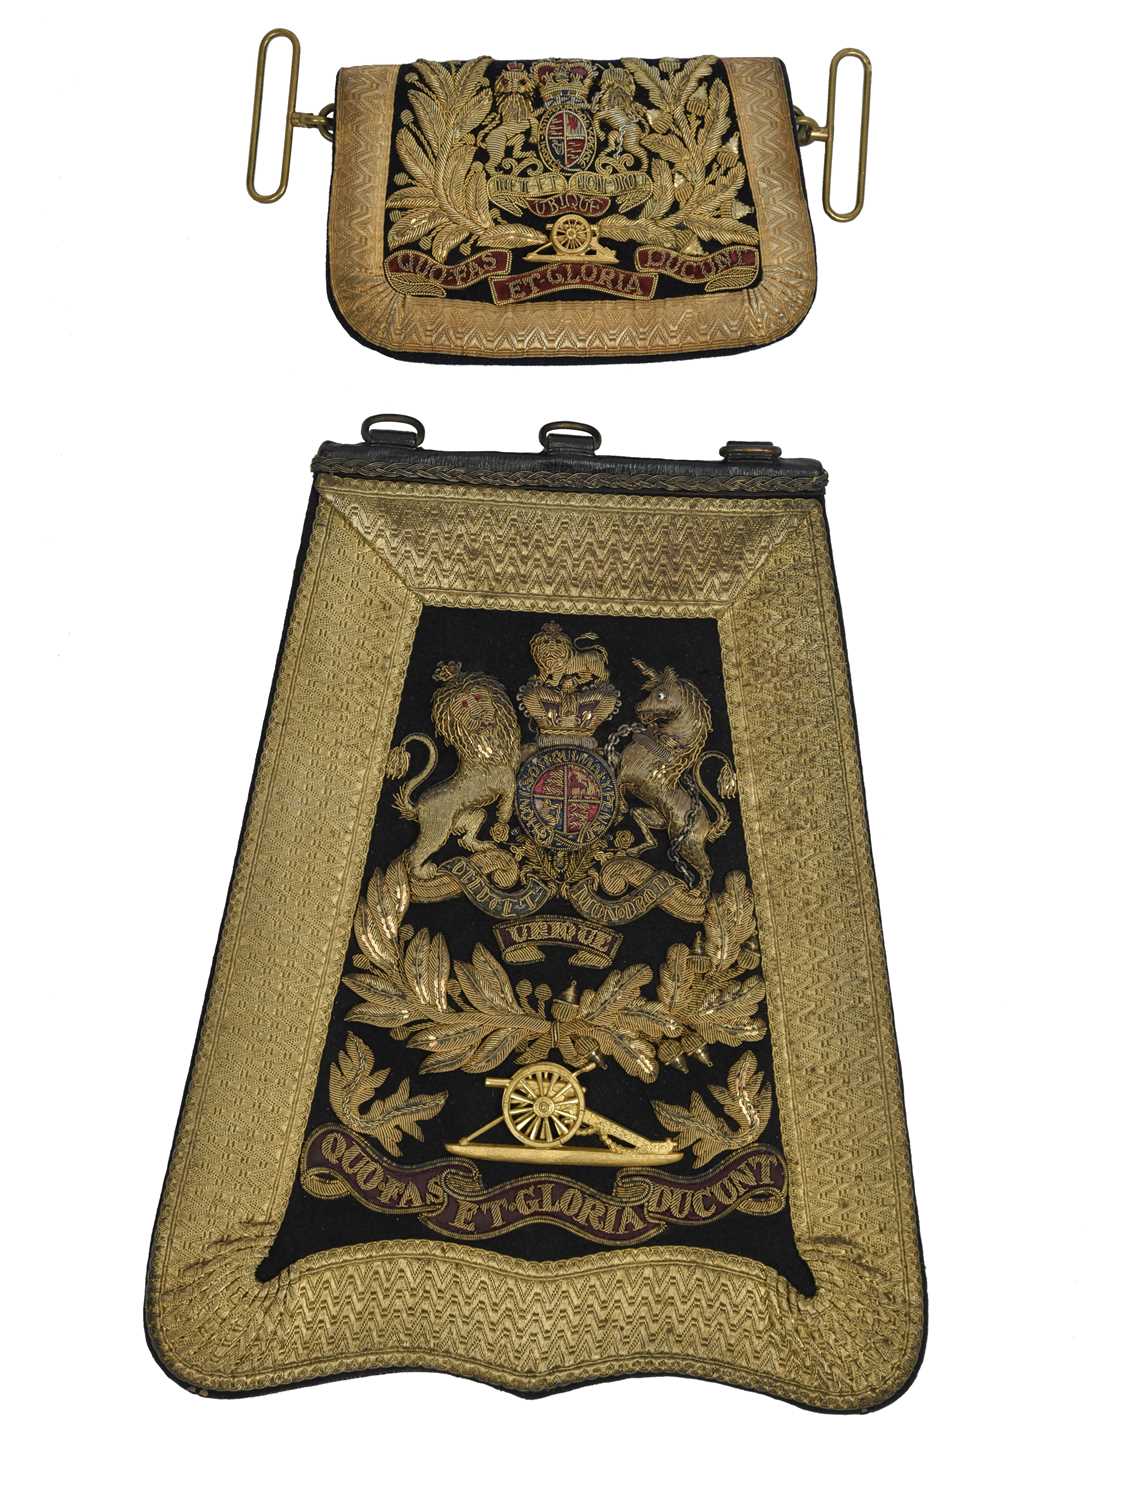 A Victorian Royal Horse Artillery officer's sabretach, faced in gold embroidery with the Royal